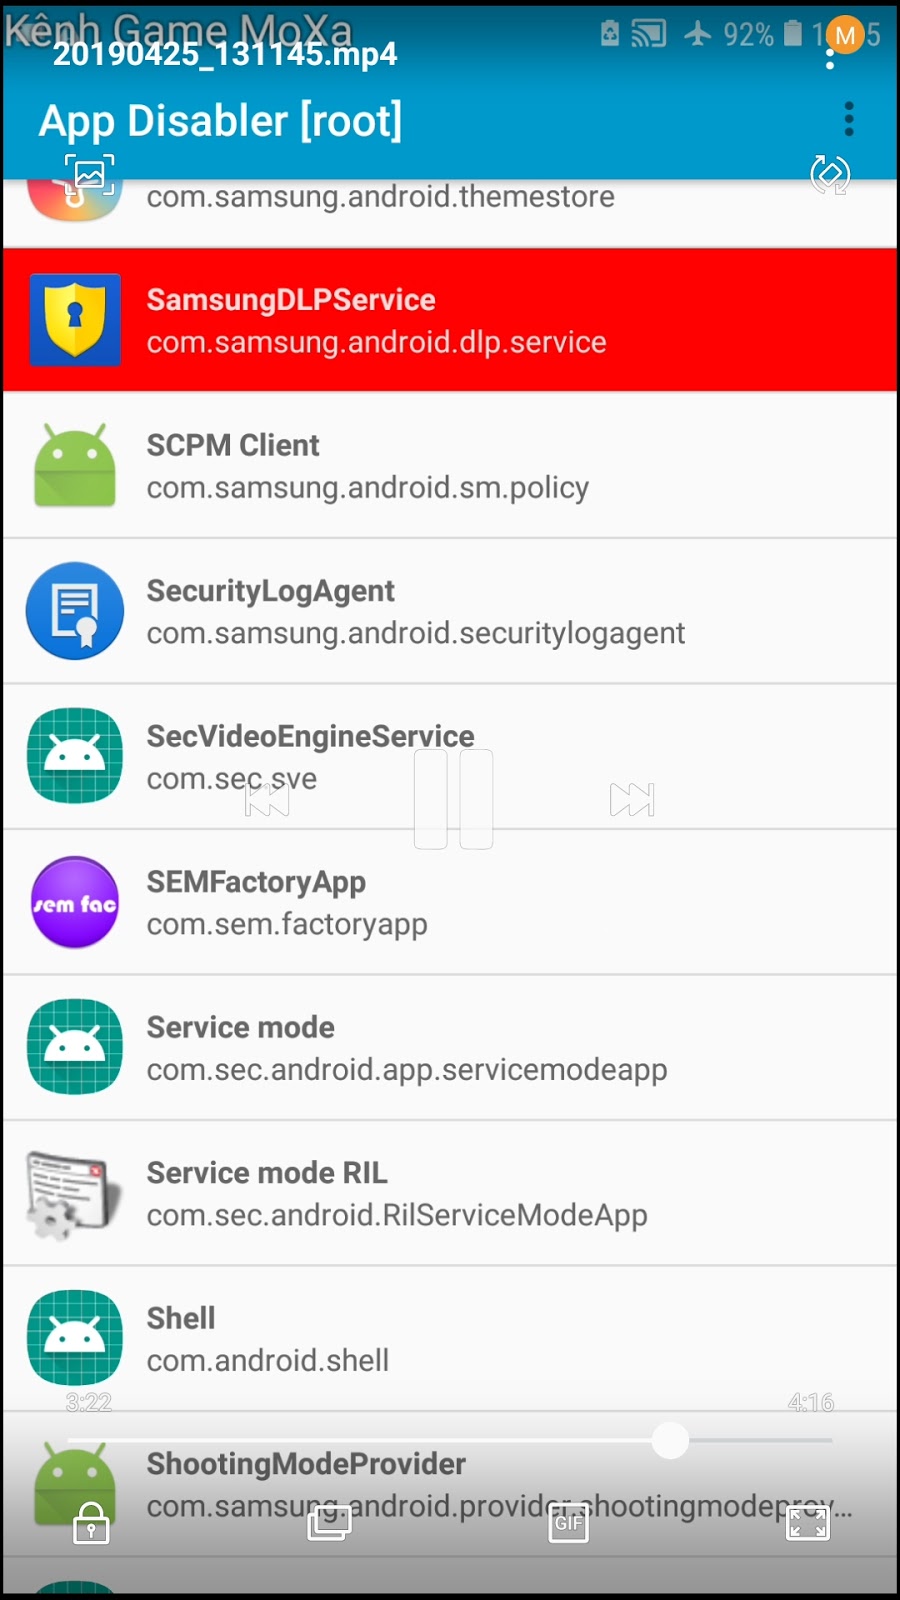 What Is Scpm Client